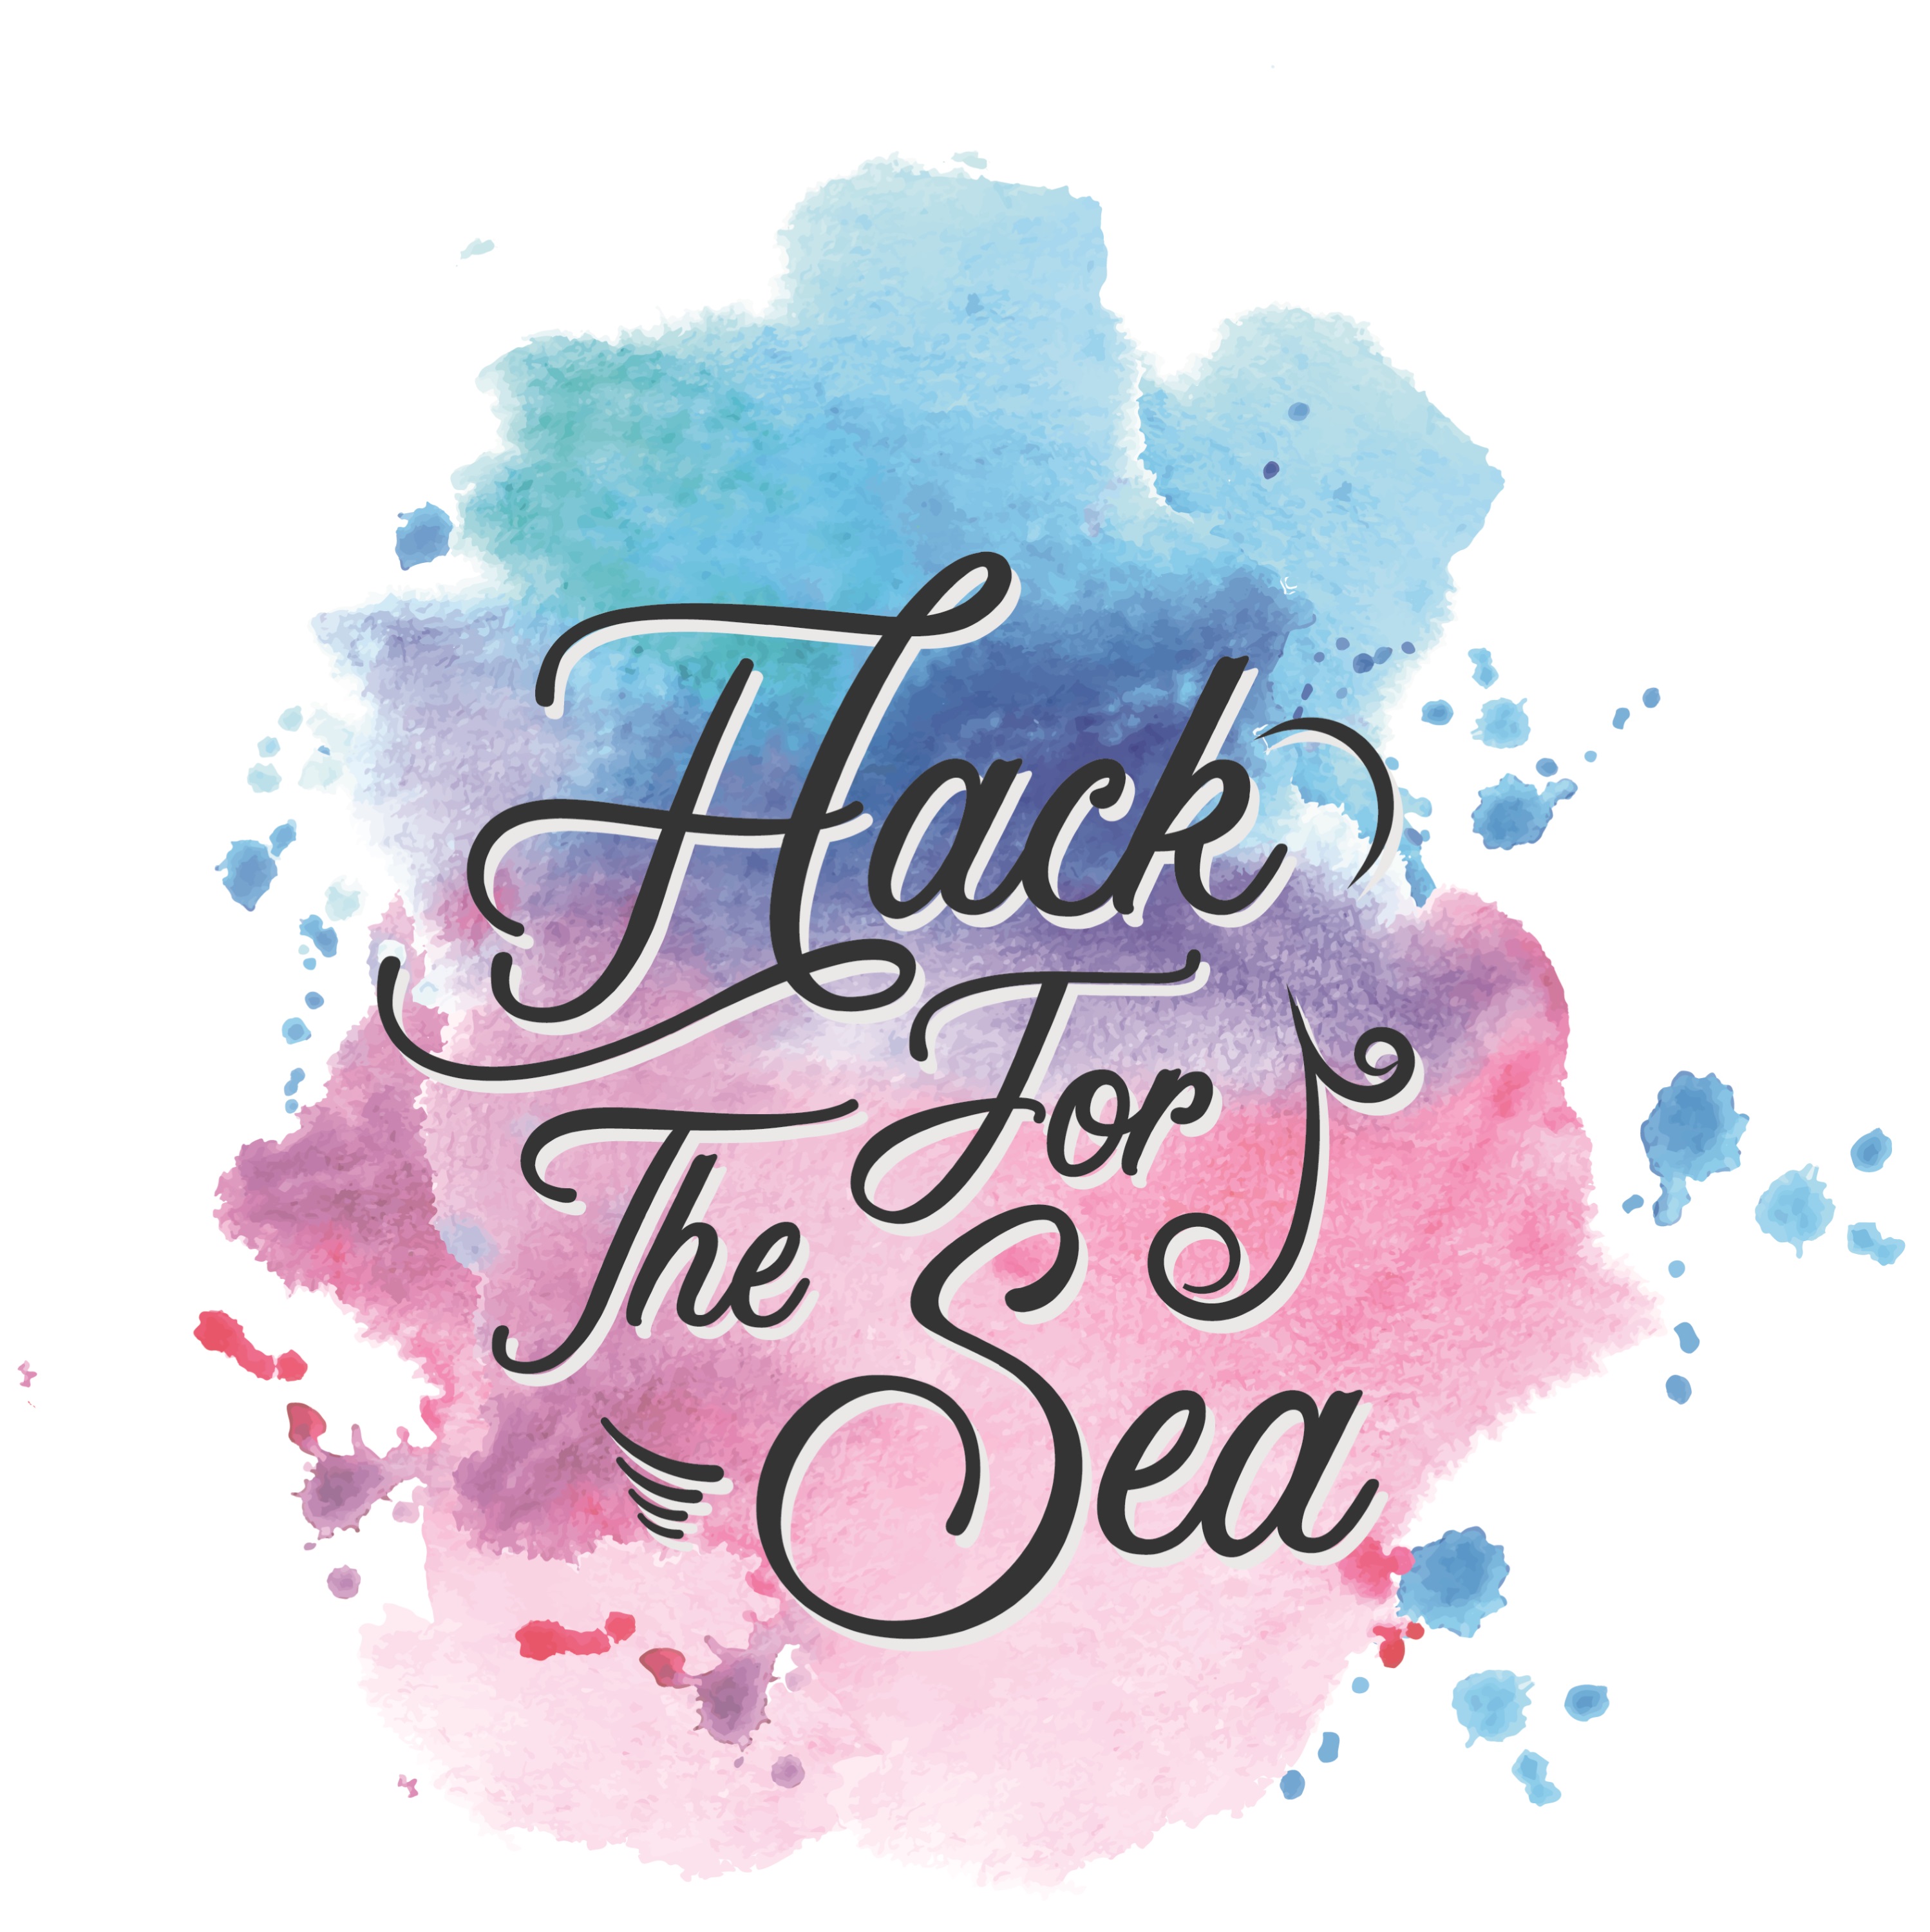 Hack for the Sea